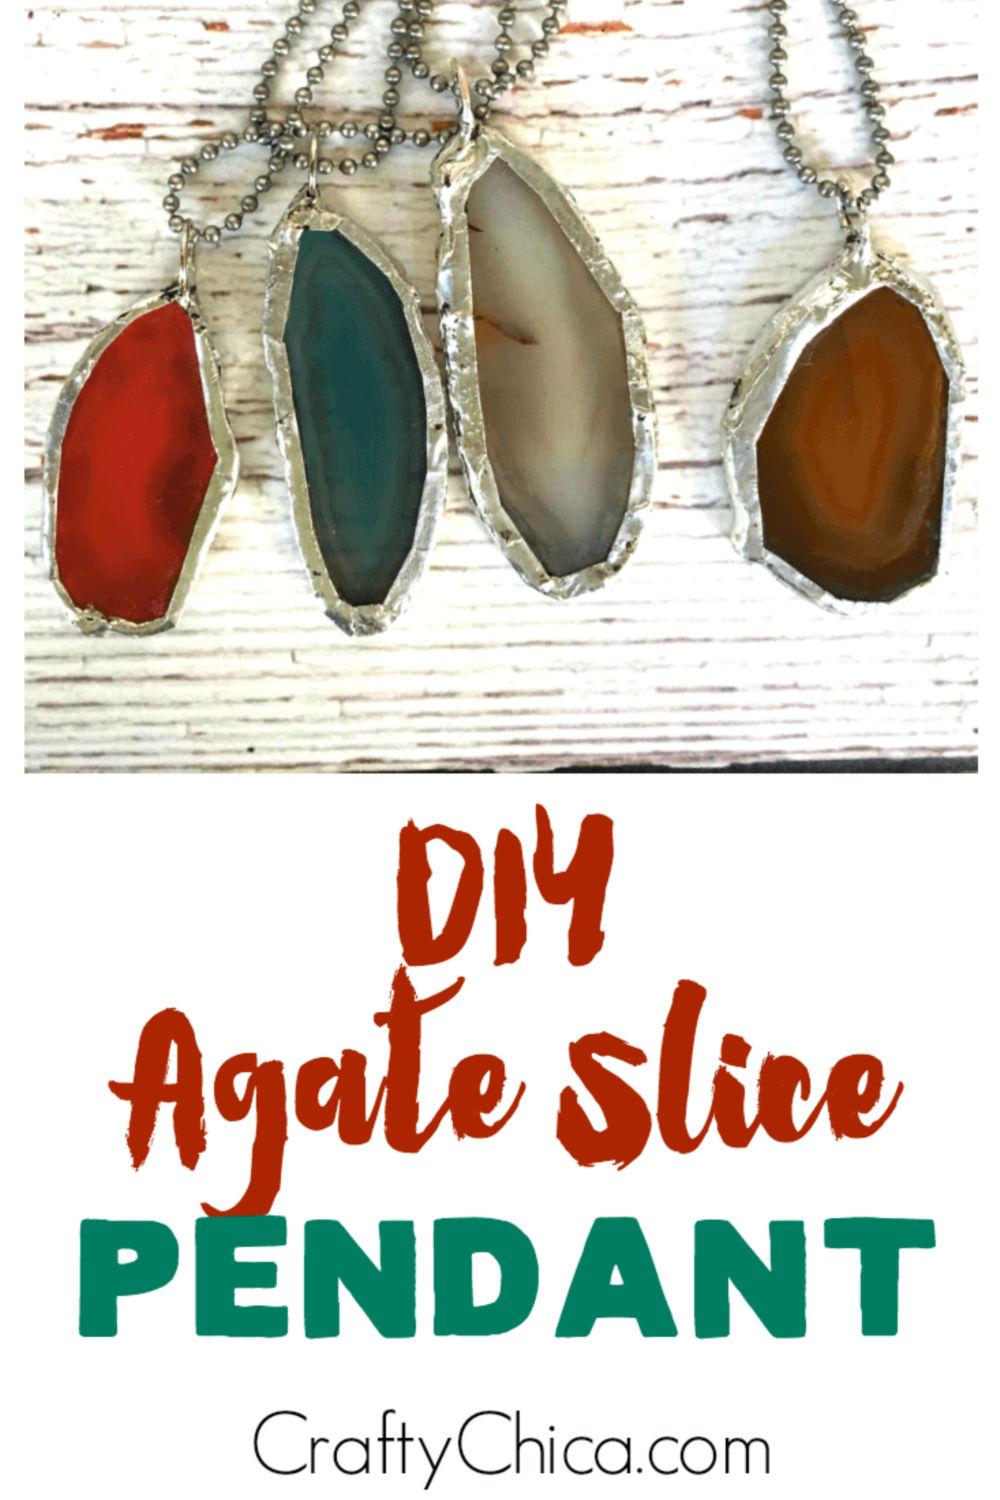 Make your own soldered agate pendant! #craftychica #solderedcrafts